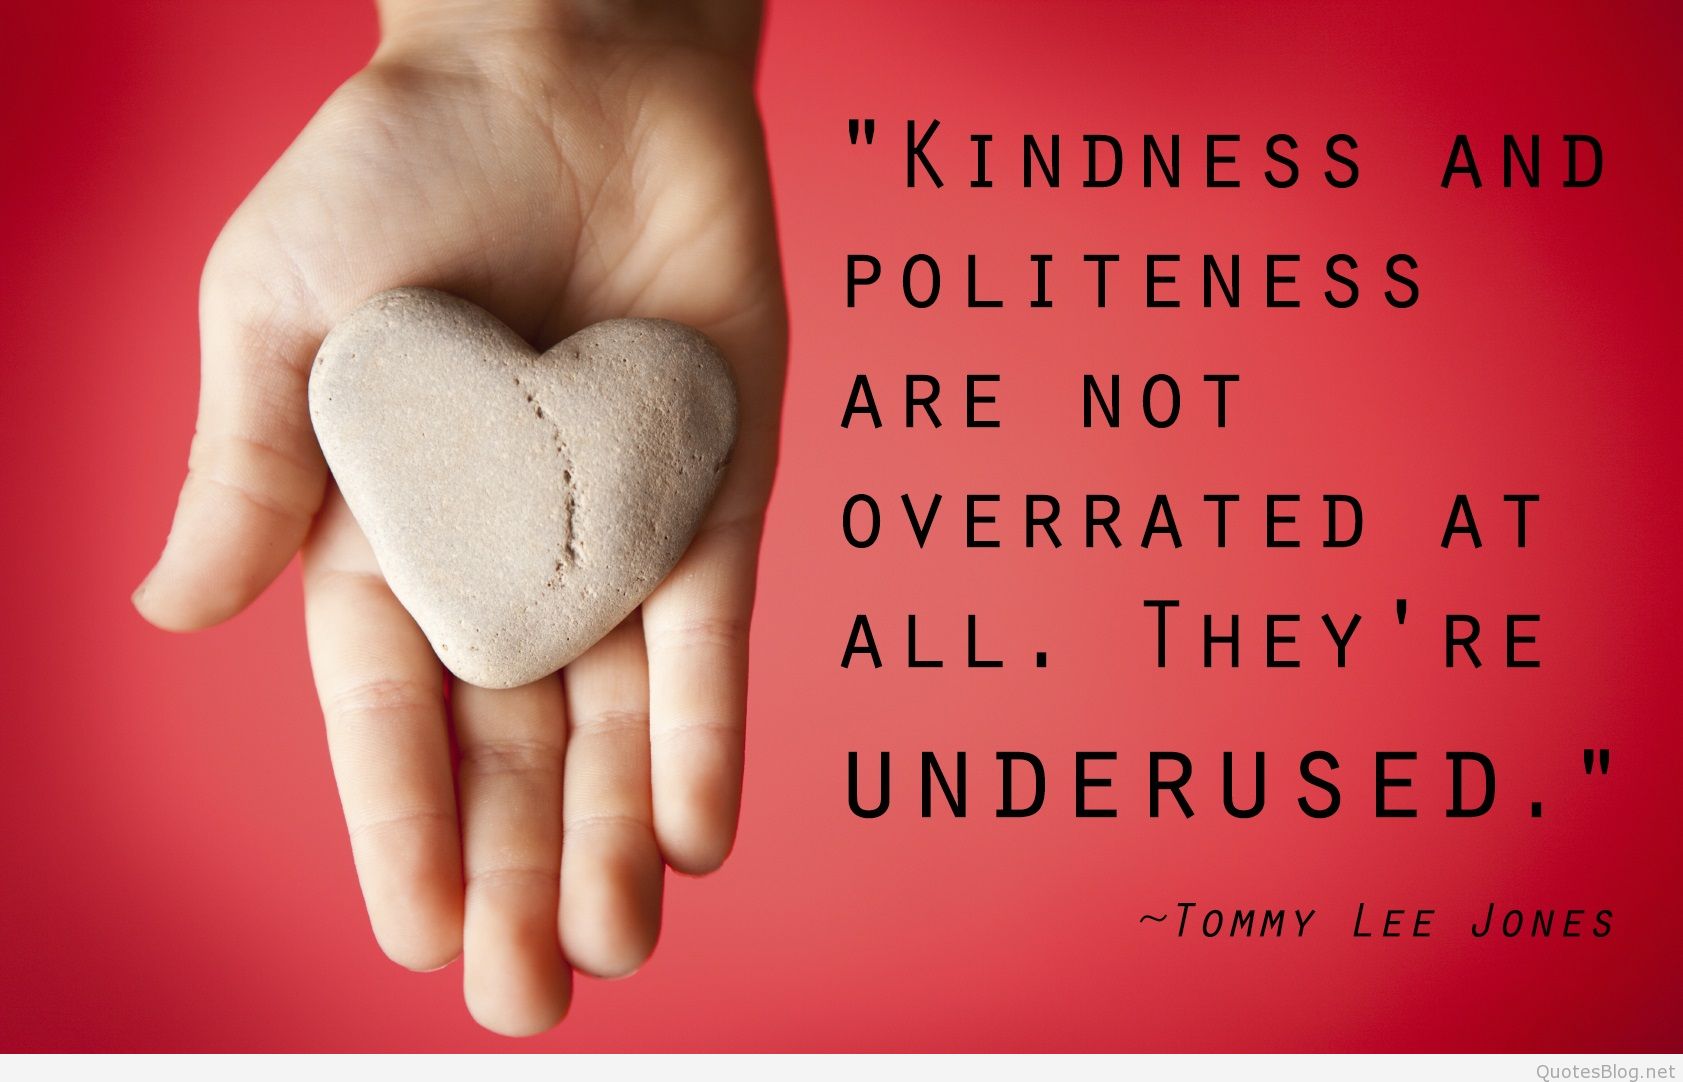 Kindness and politeness are not overrated at all. They're underused - Tommy Lee Jones